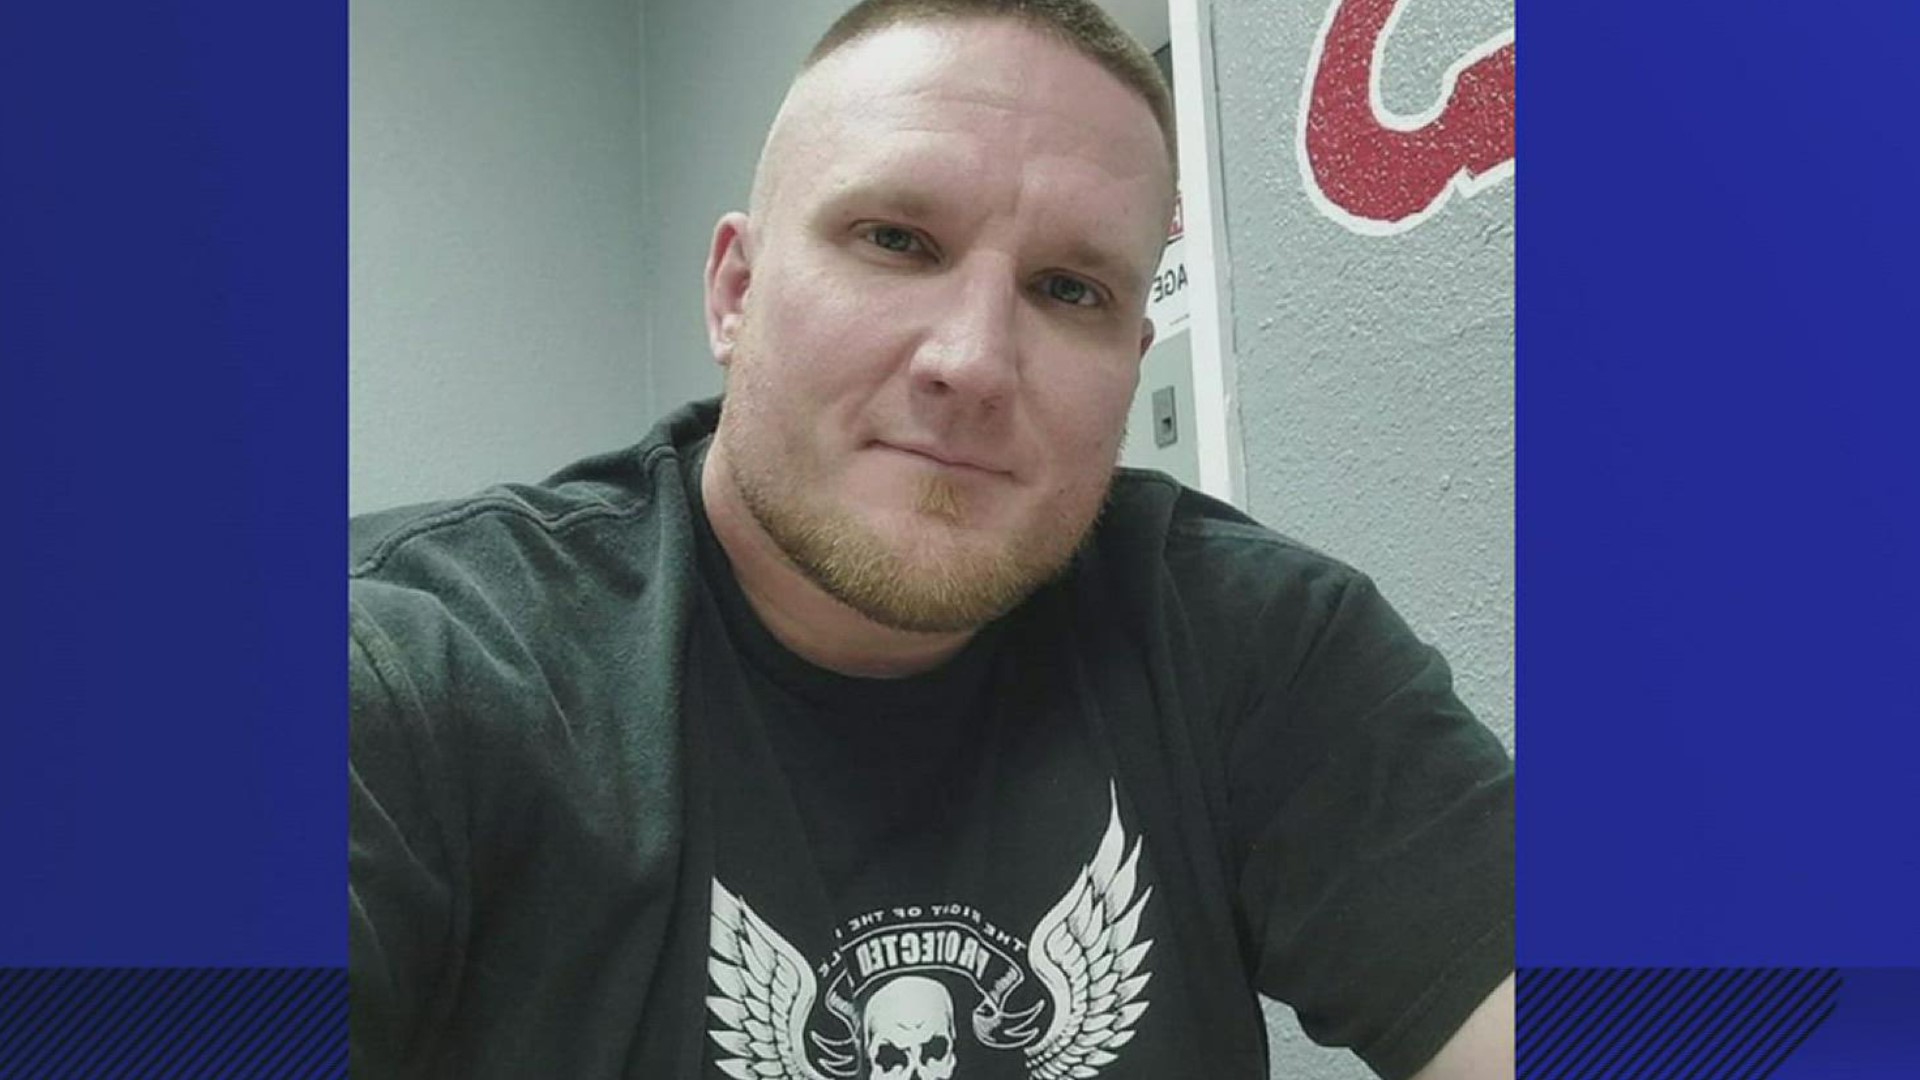 The family is currently mourning the loss of 41-year-old Justin Vodrey's, who moved to San Antonio for a truck driving job.